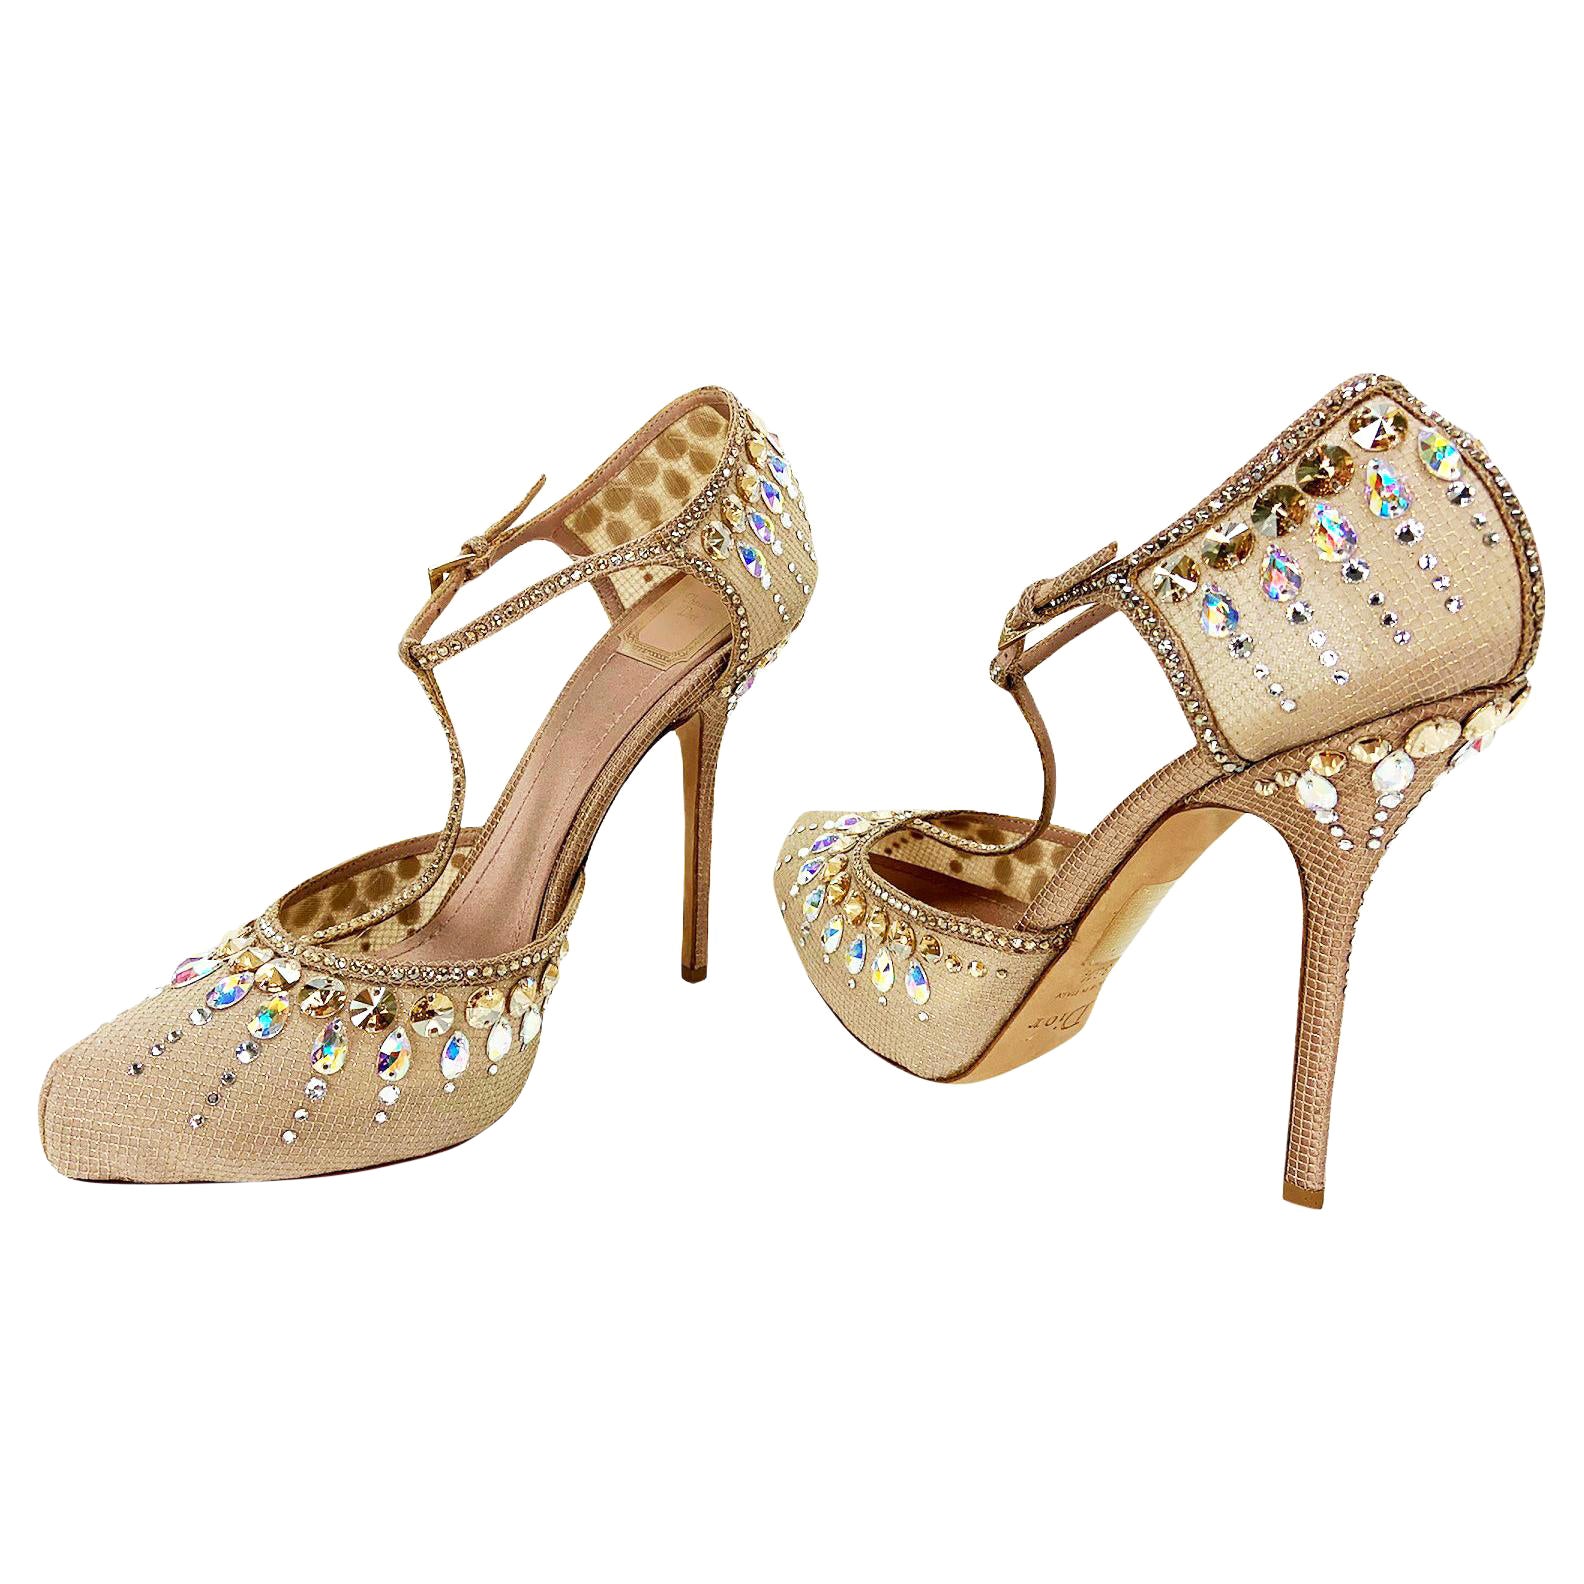 New Christian Dior Nude Crystal Embellished T-strap Shoes Pumps 39.5  For Sale